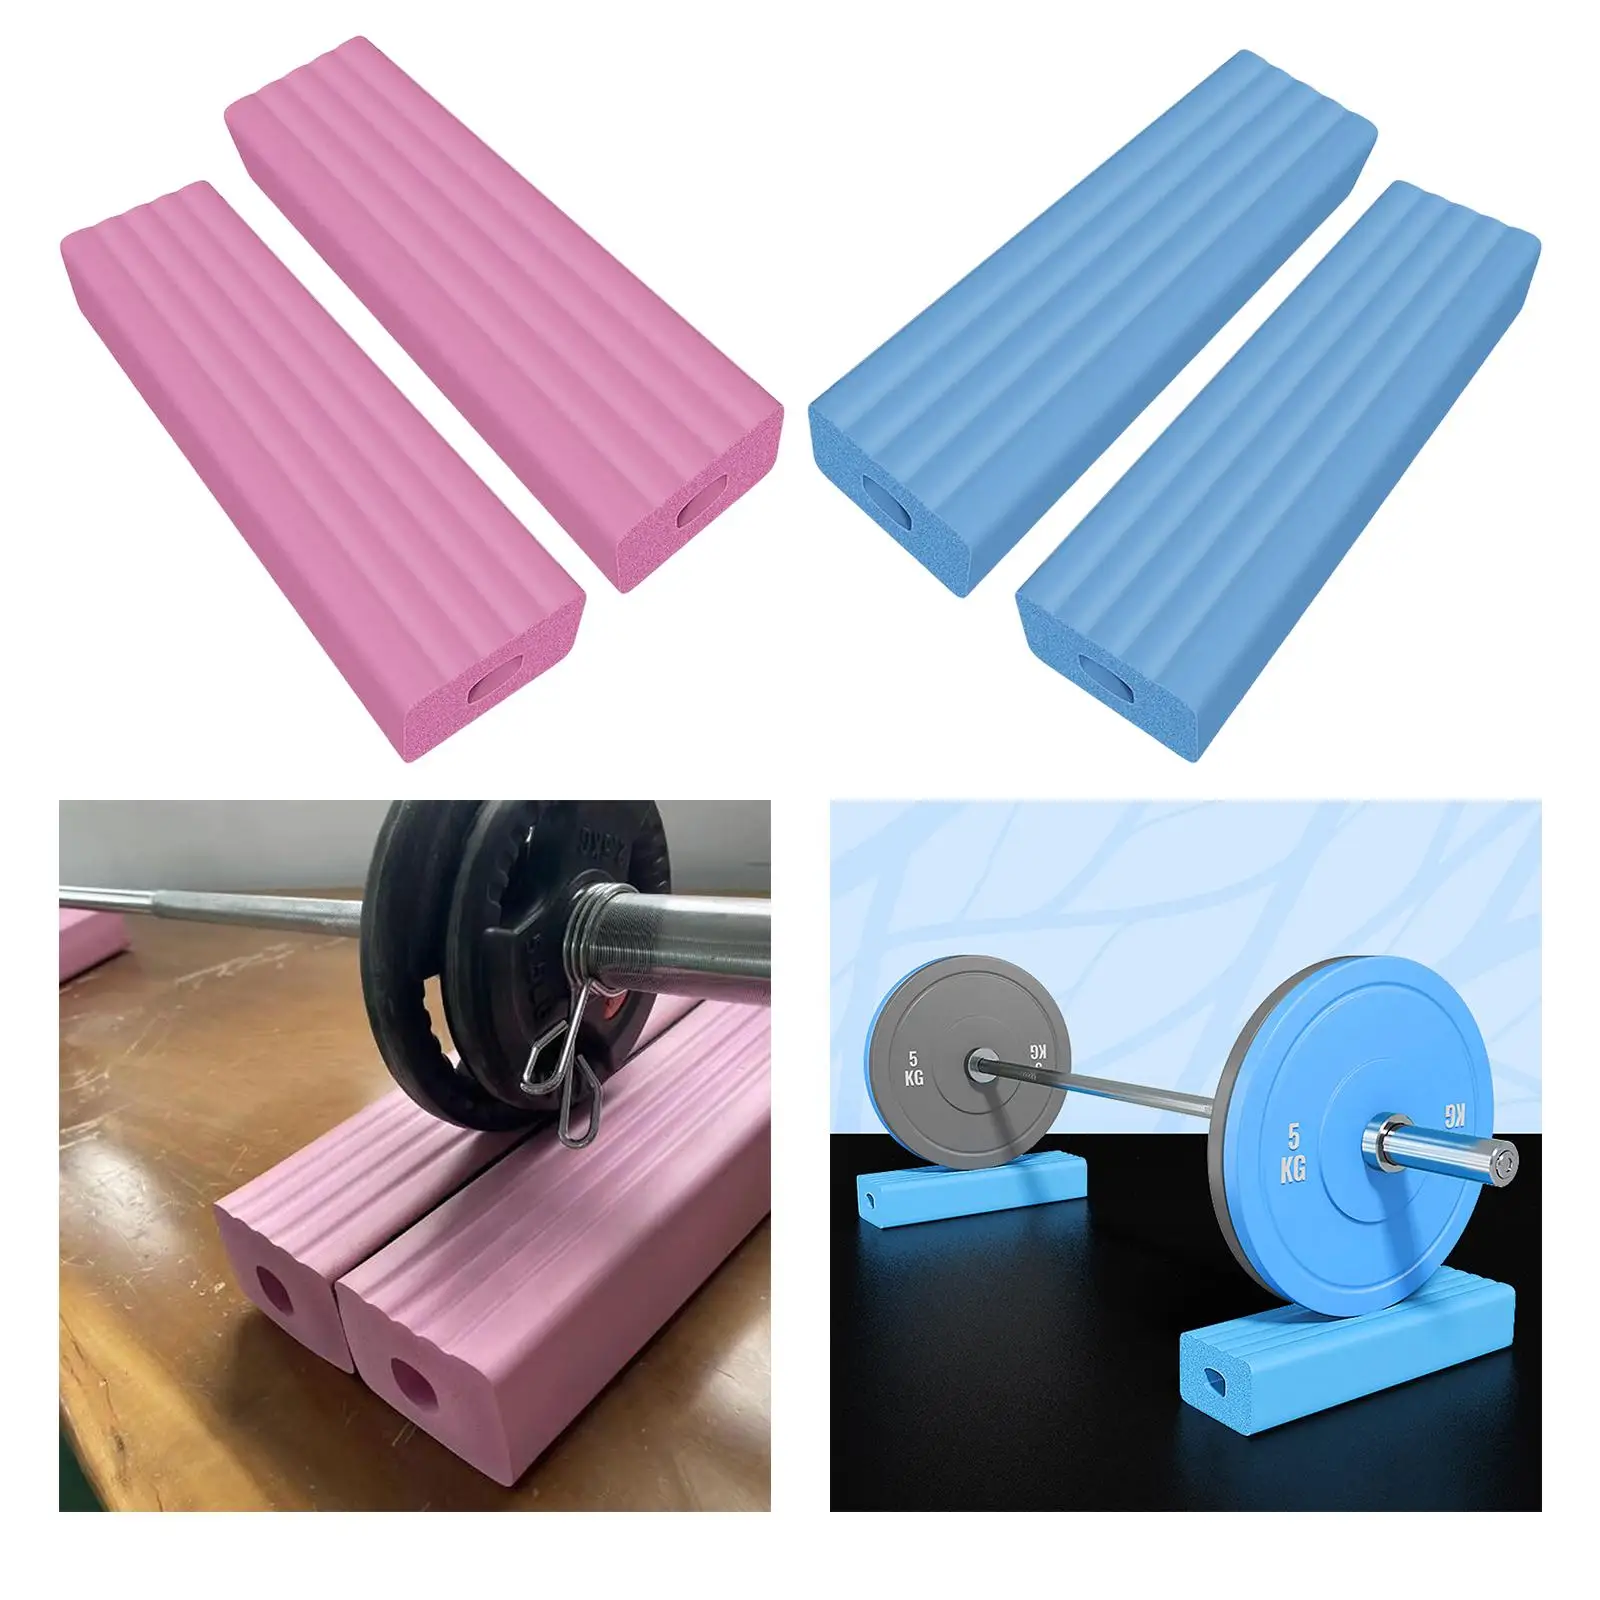 Foam Rubber Weightlifting Cushion Storage Mat for Athlete Weight Training Convenient Lightweight ,Easy to Clean and Store